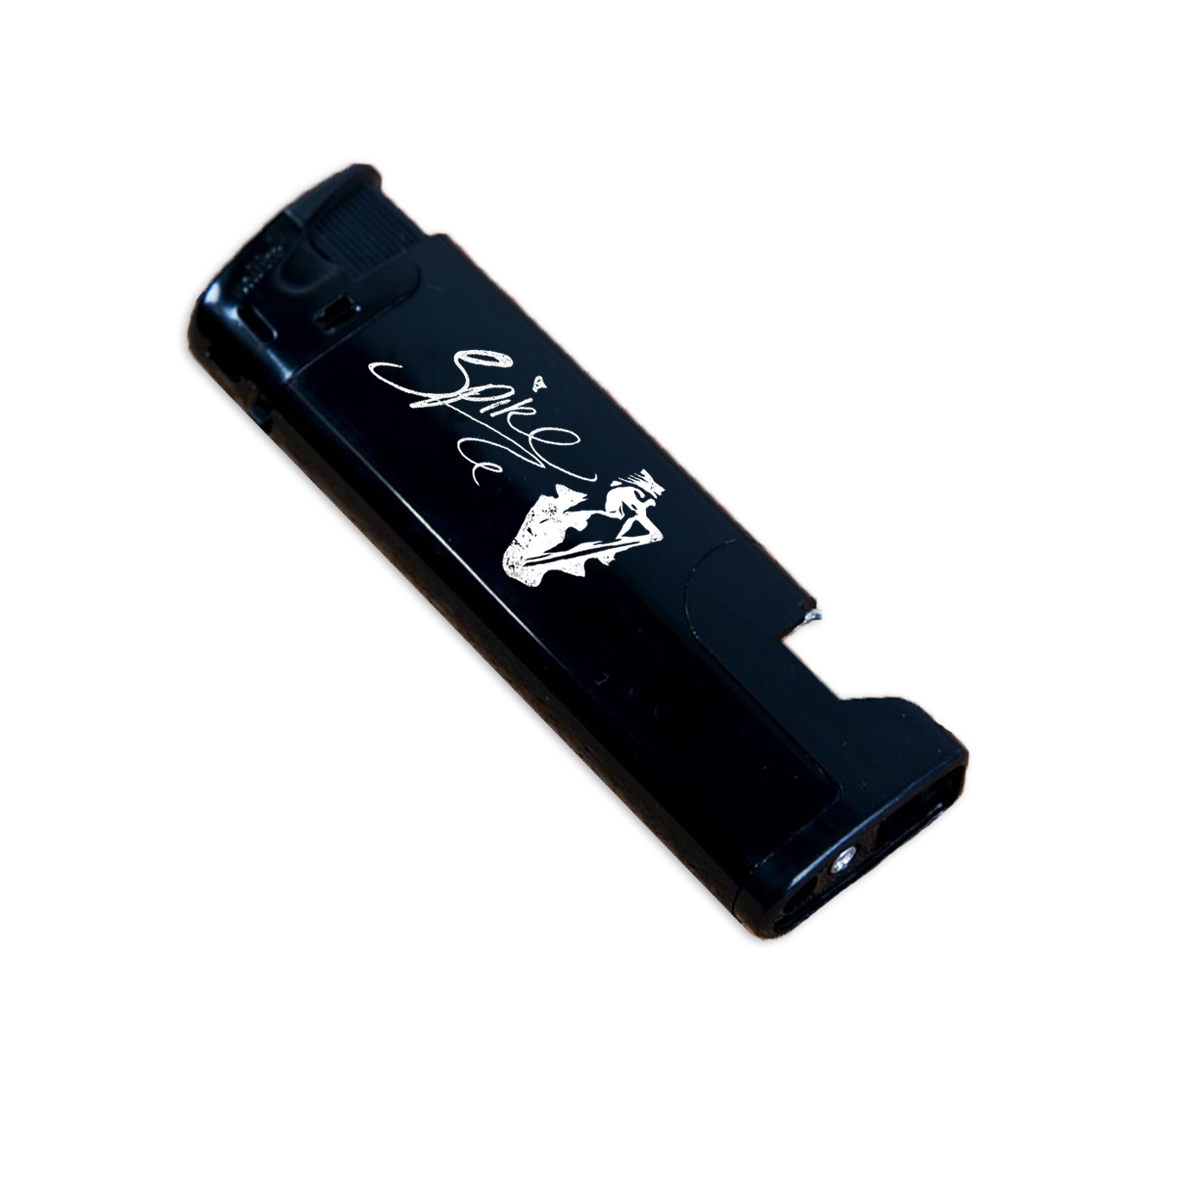 Spike bottle opener/lighter, black with white graphic of spike singing and logo